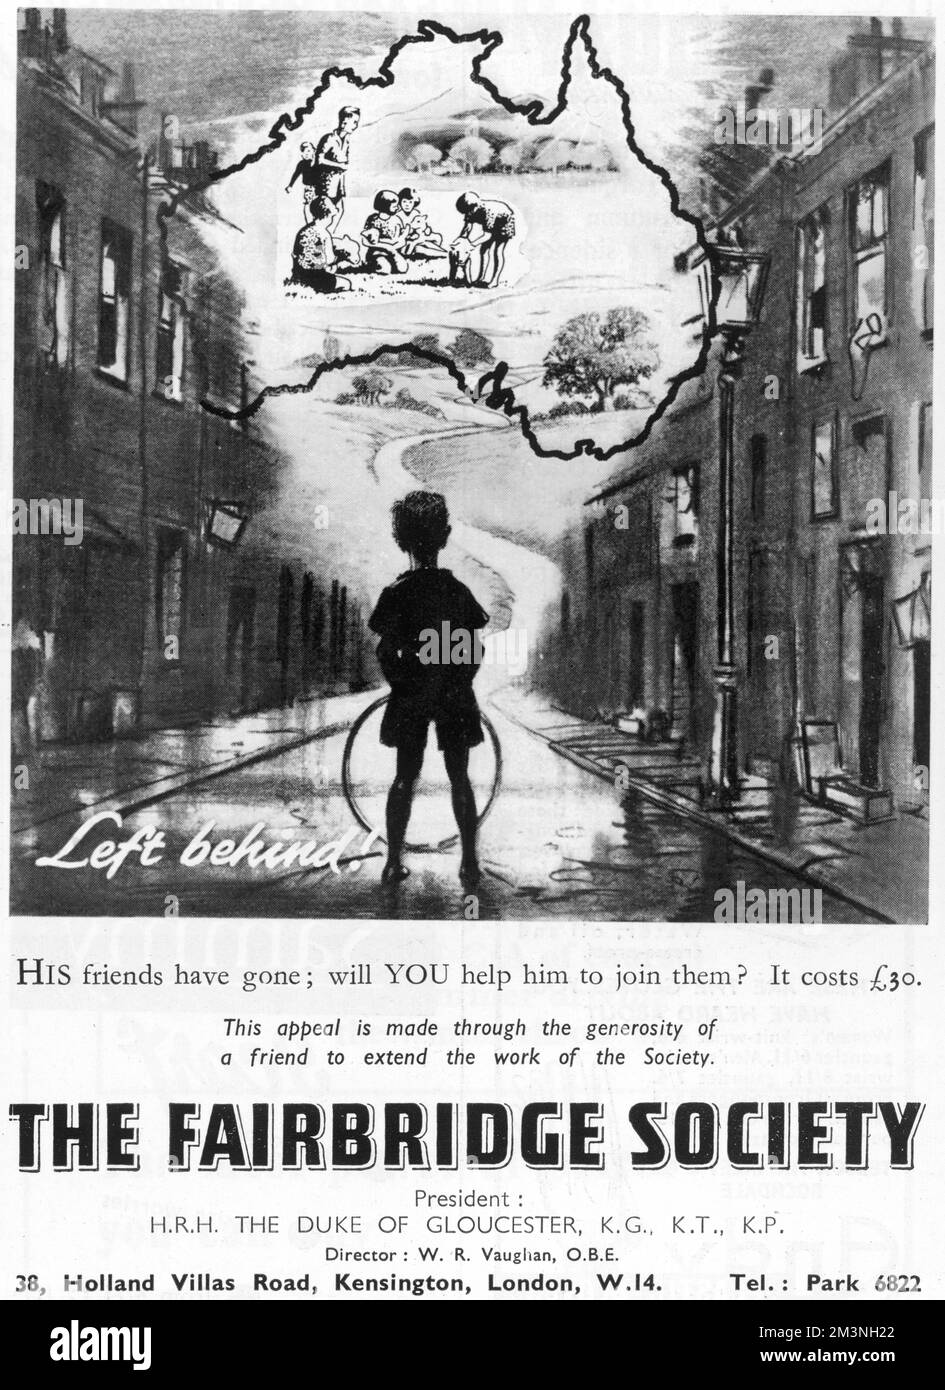 Advertisement for The Fairbridge Society, a charity founded by Kingsley Fairbridge in 1909 for the furtherance of child emigration to the colonies to help orphans and impoverished children in Britain. This advert shows a young boy 'Left behind!' in the slums of England while his friends are enjoying the open space of Australia.     Date: 1954 Stock Photo